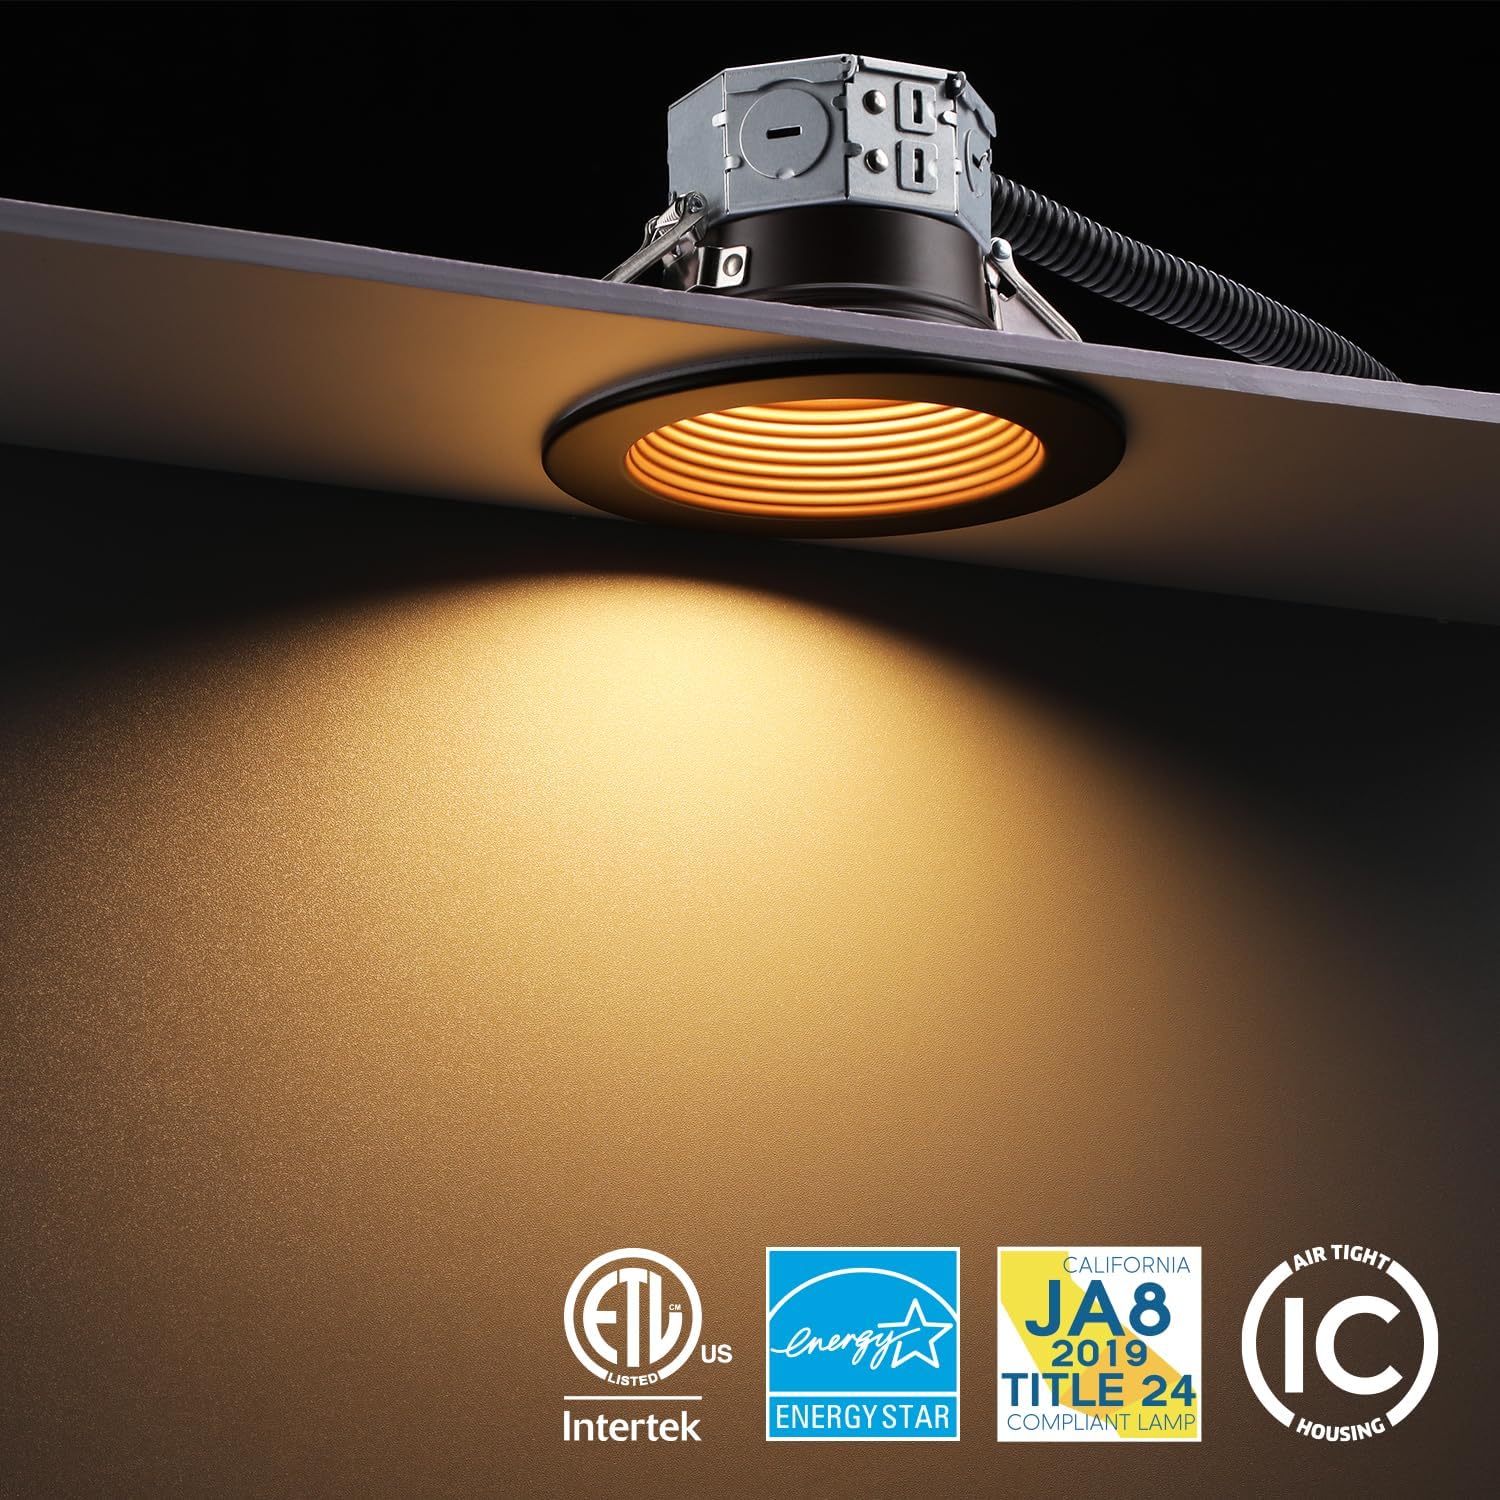 TORCHSTAR Bafflux 4" Glare-free LED Recessed Light - 10W Dimmable with Oil Rubbed Bronze Baffle Trim